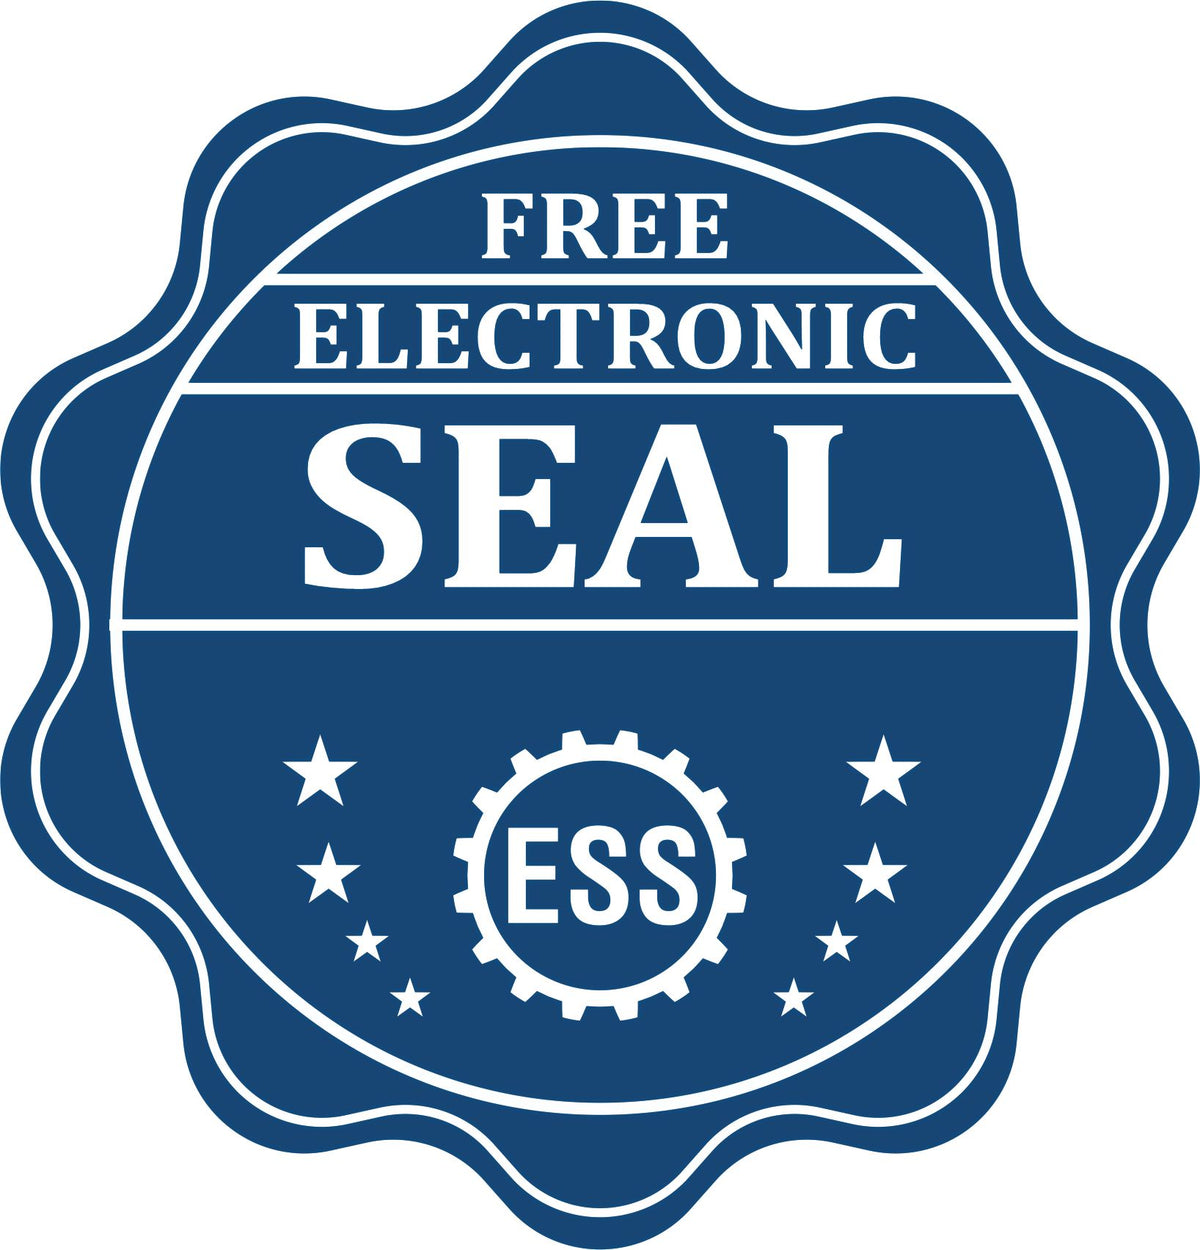 A badge showing a free electronic seal for the MaxLight Premium Pre-Inked Arkansas Rectangular Notarial Stamp with stars and the ESS gear on the emblem.